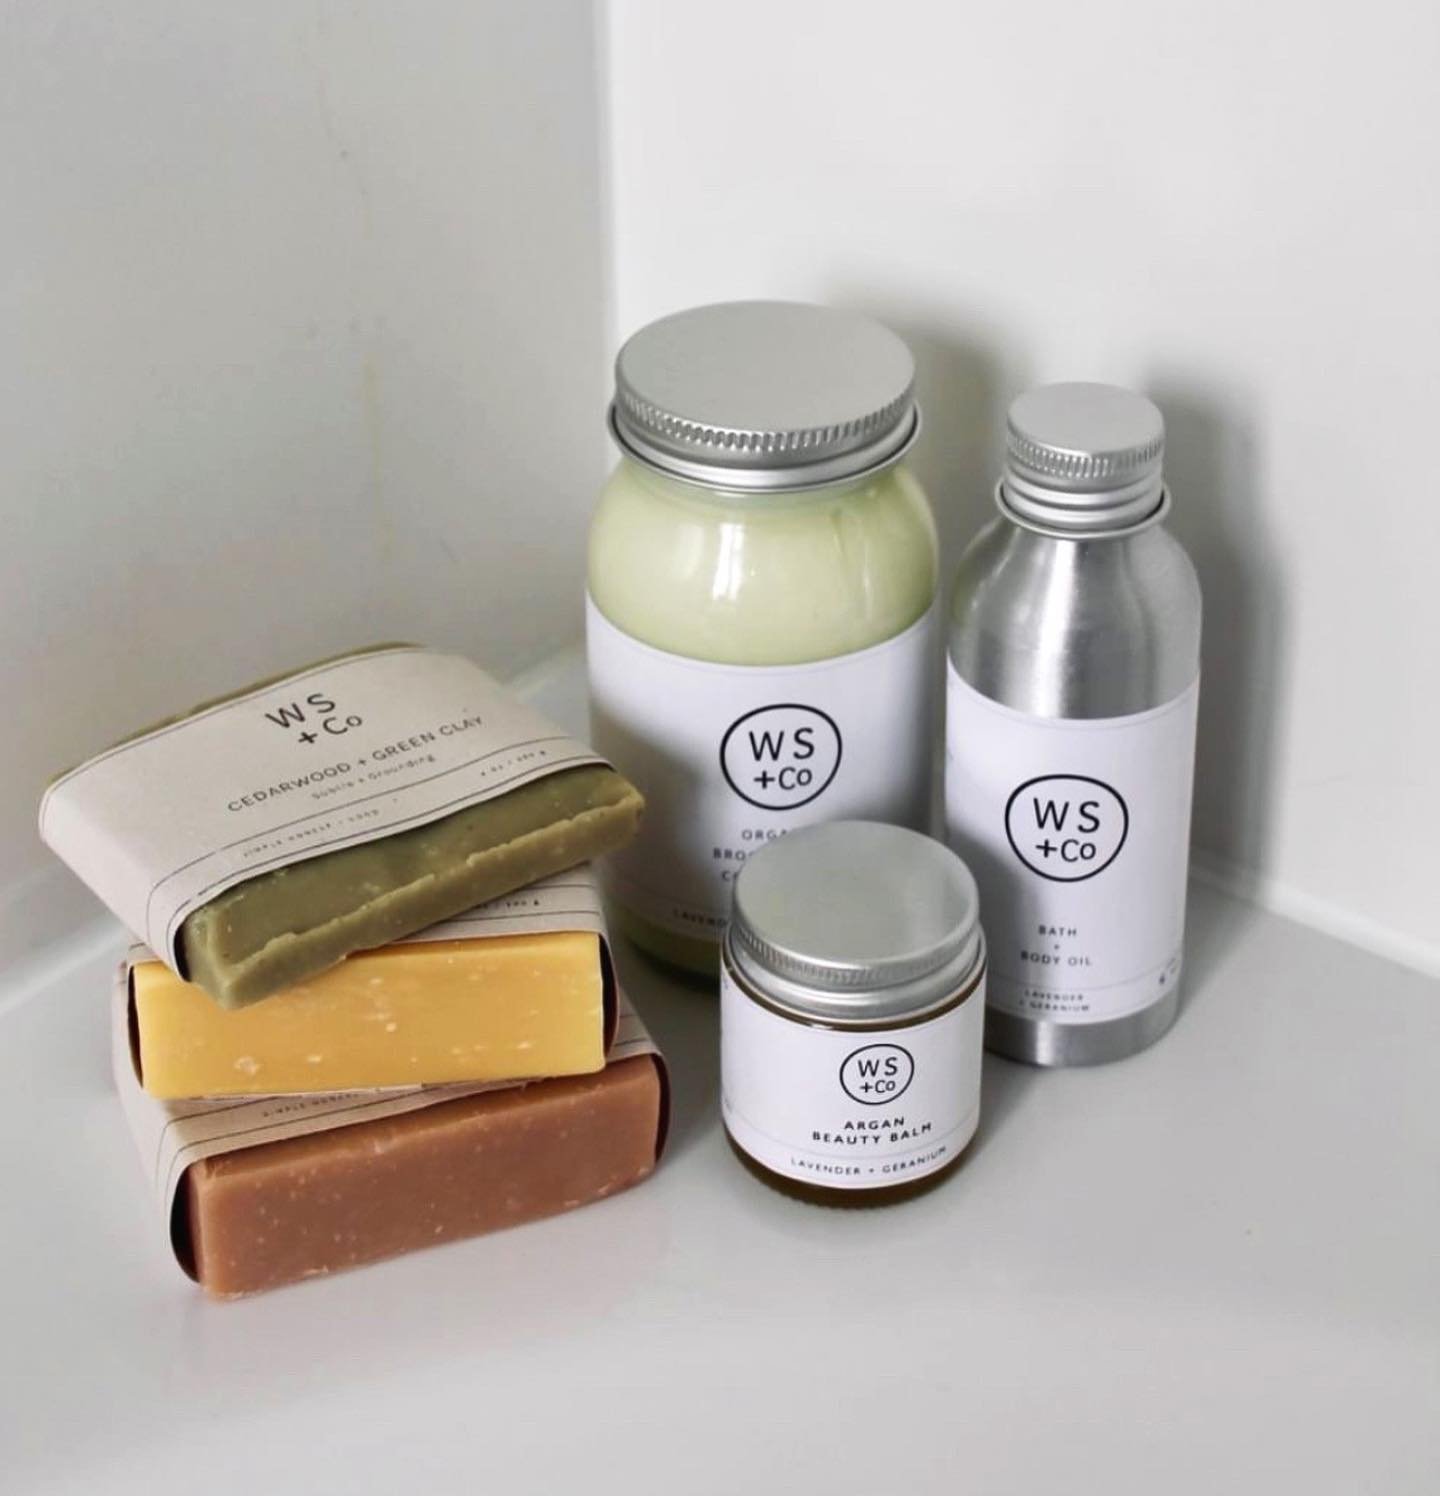 Last Chance to enter our Give Away with @georganics is today ✨

Scroll back to our post from last week to enter

And Good Luck 🤍

#naturalskincare #handmadewithlove #plasticfreebathroom #reducewaste #noplasticwaste